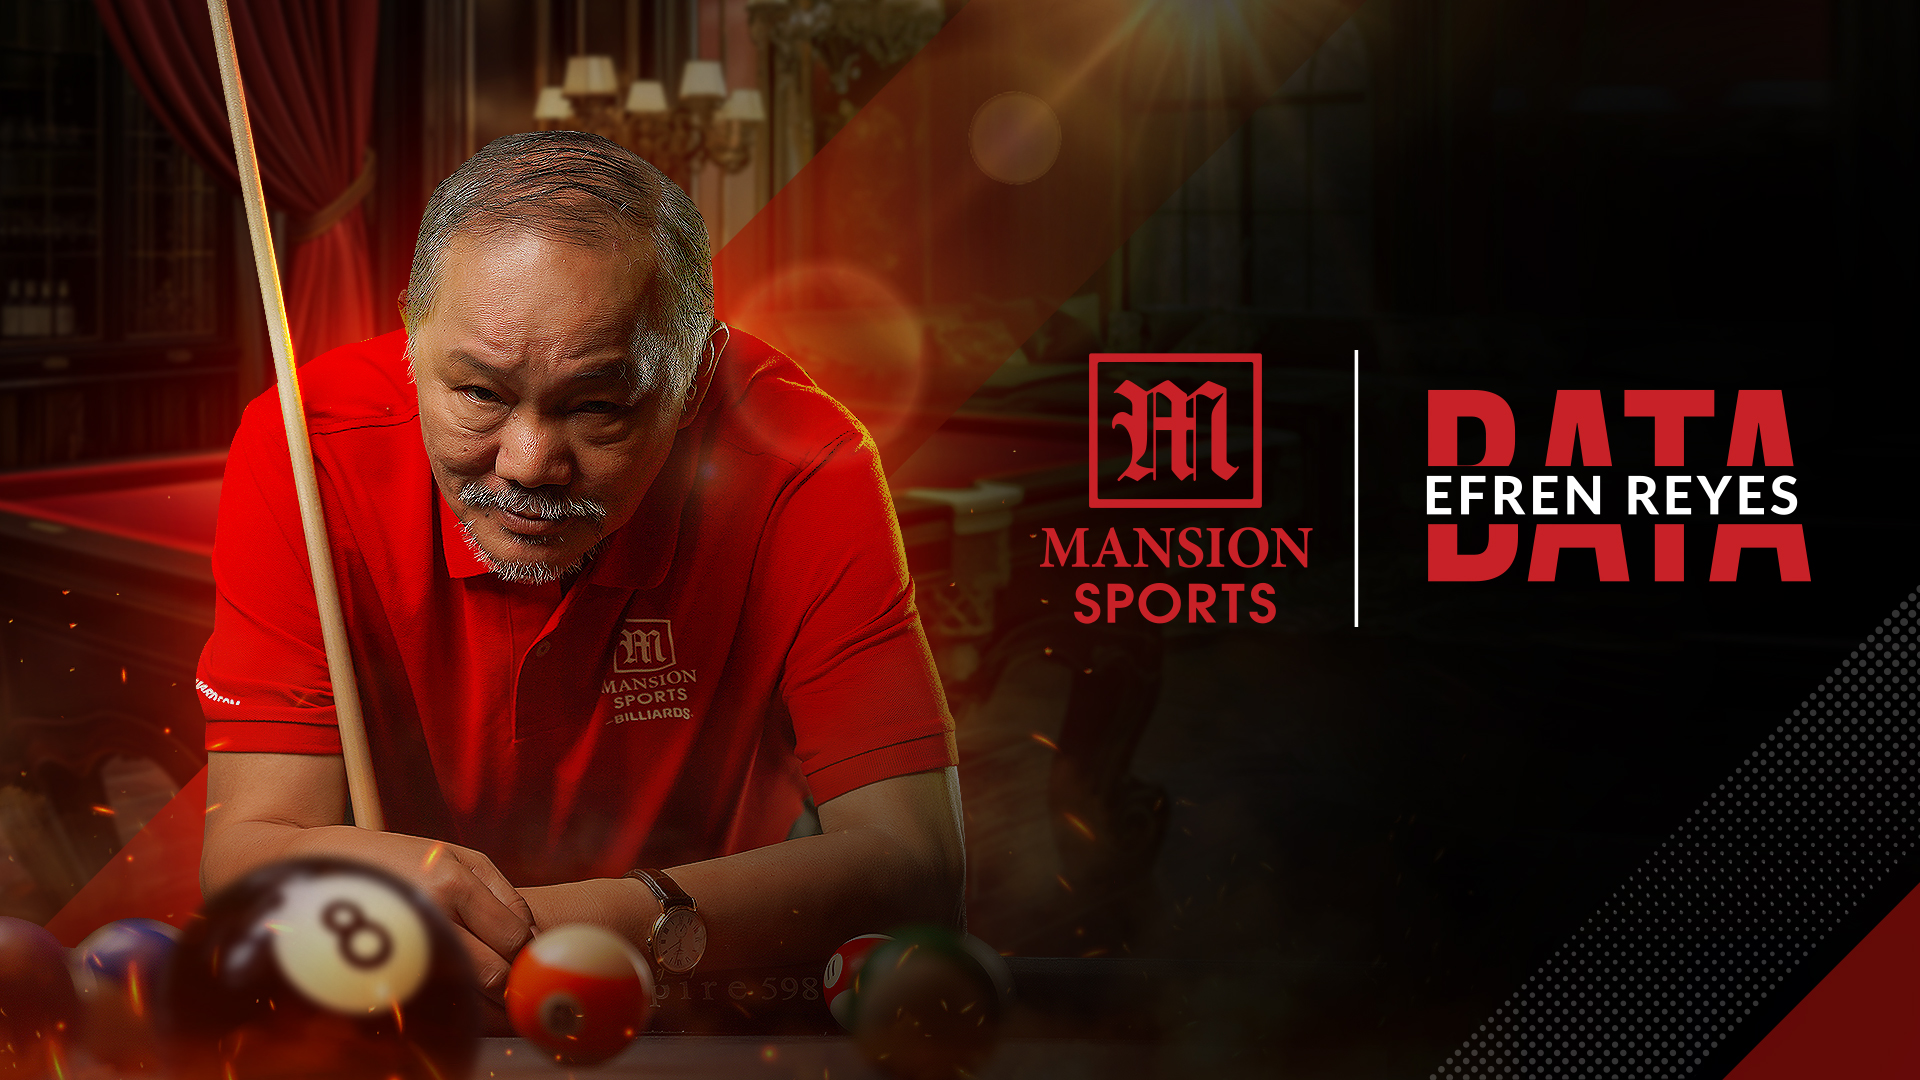 uk-based-pe-mansion-sports-announces-partnership-with-billiards-legend-efren-‘bata’-reyes-to-launch-billiards-ecommerce-site